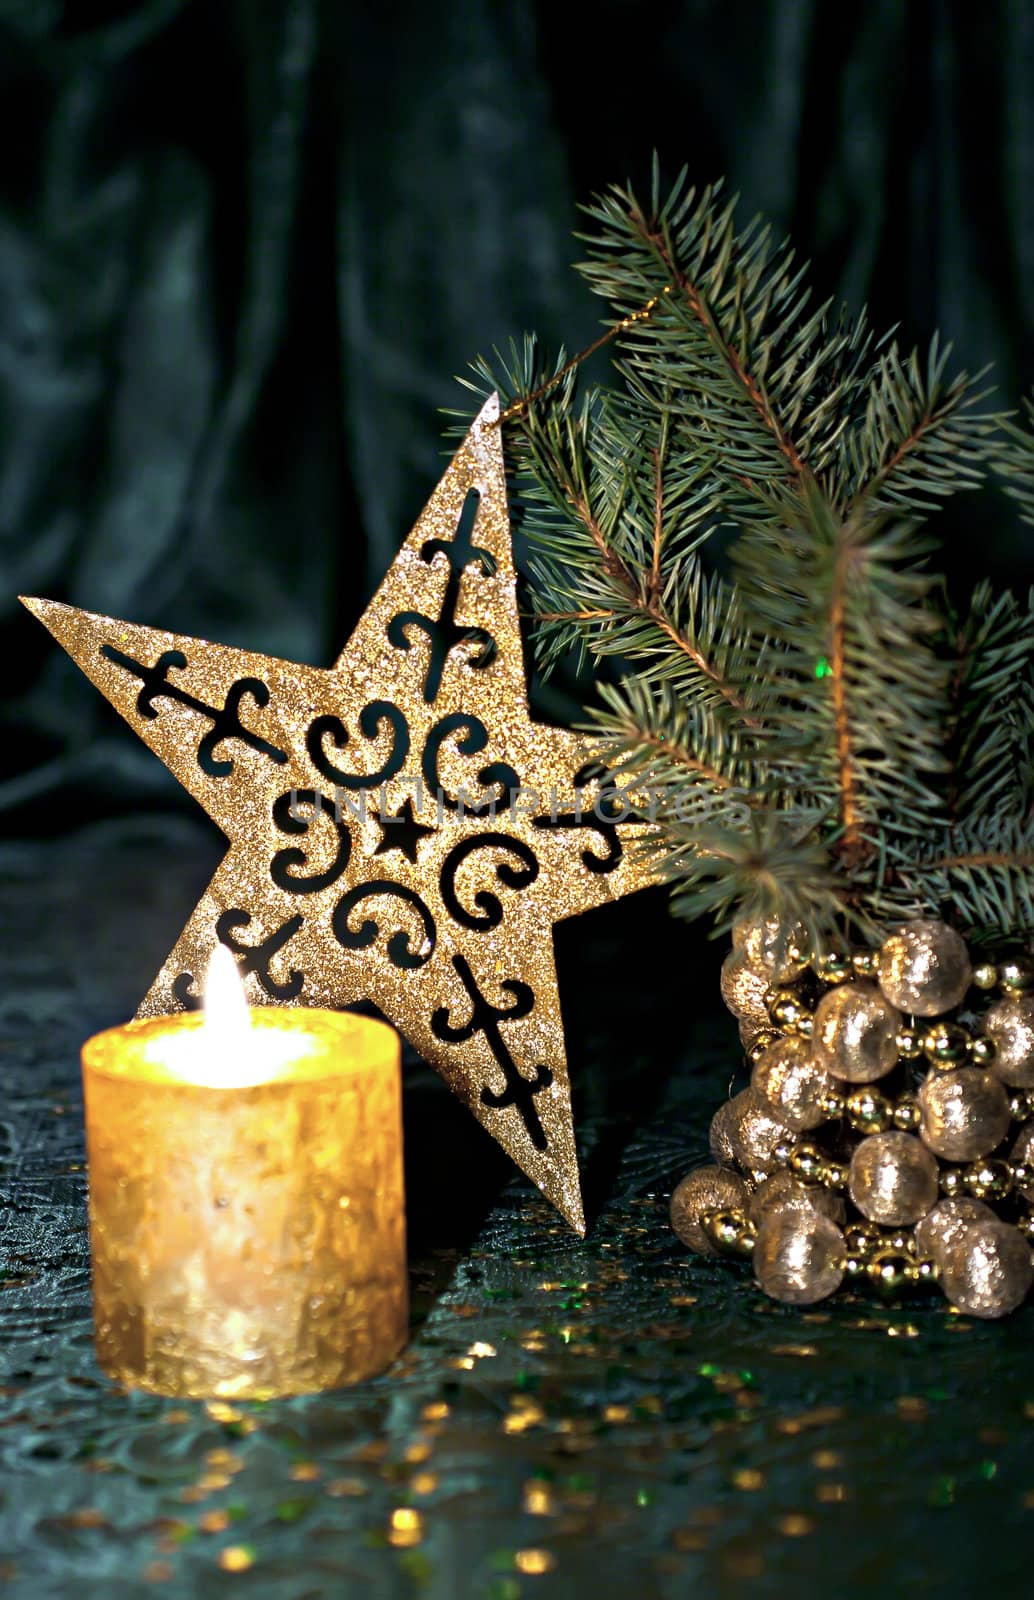 Christmas composition, candle, fir branch and star on a green background.
